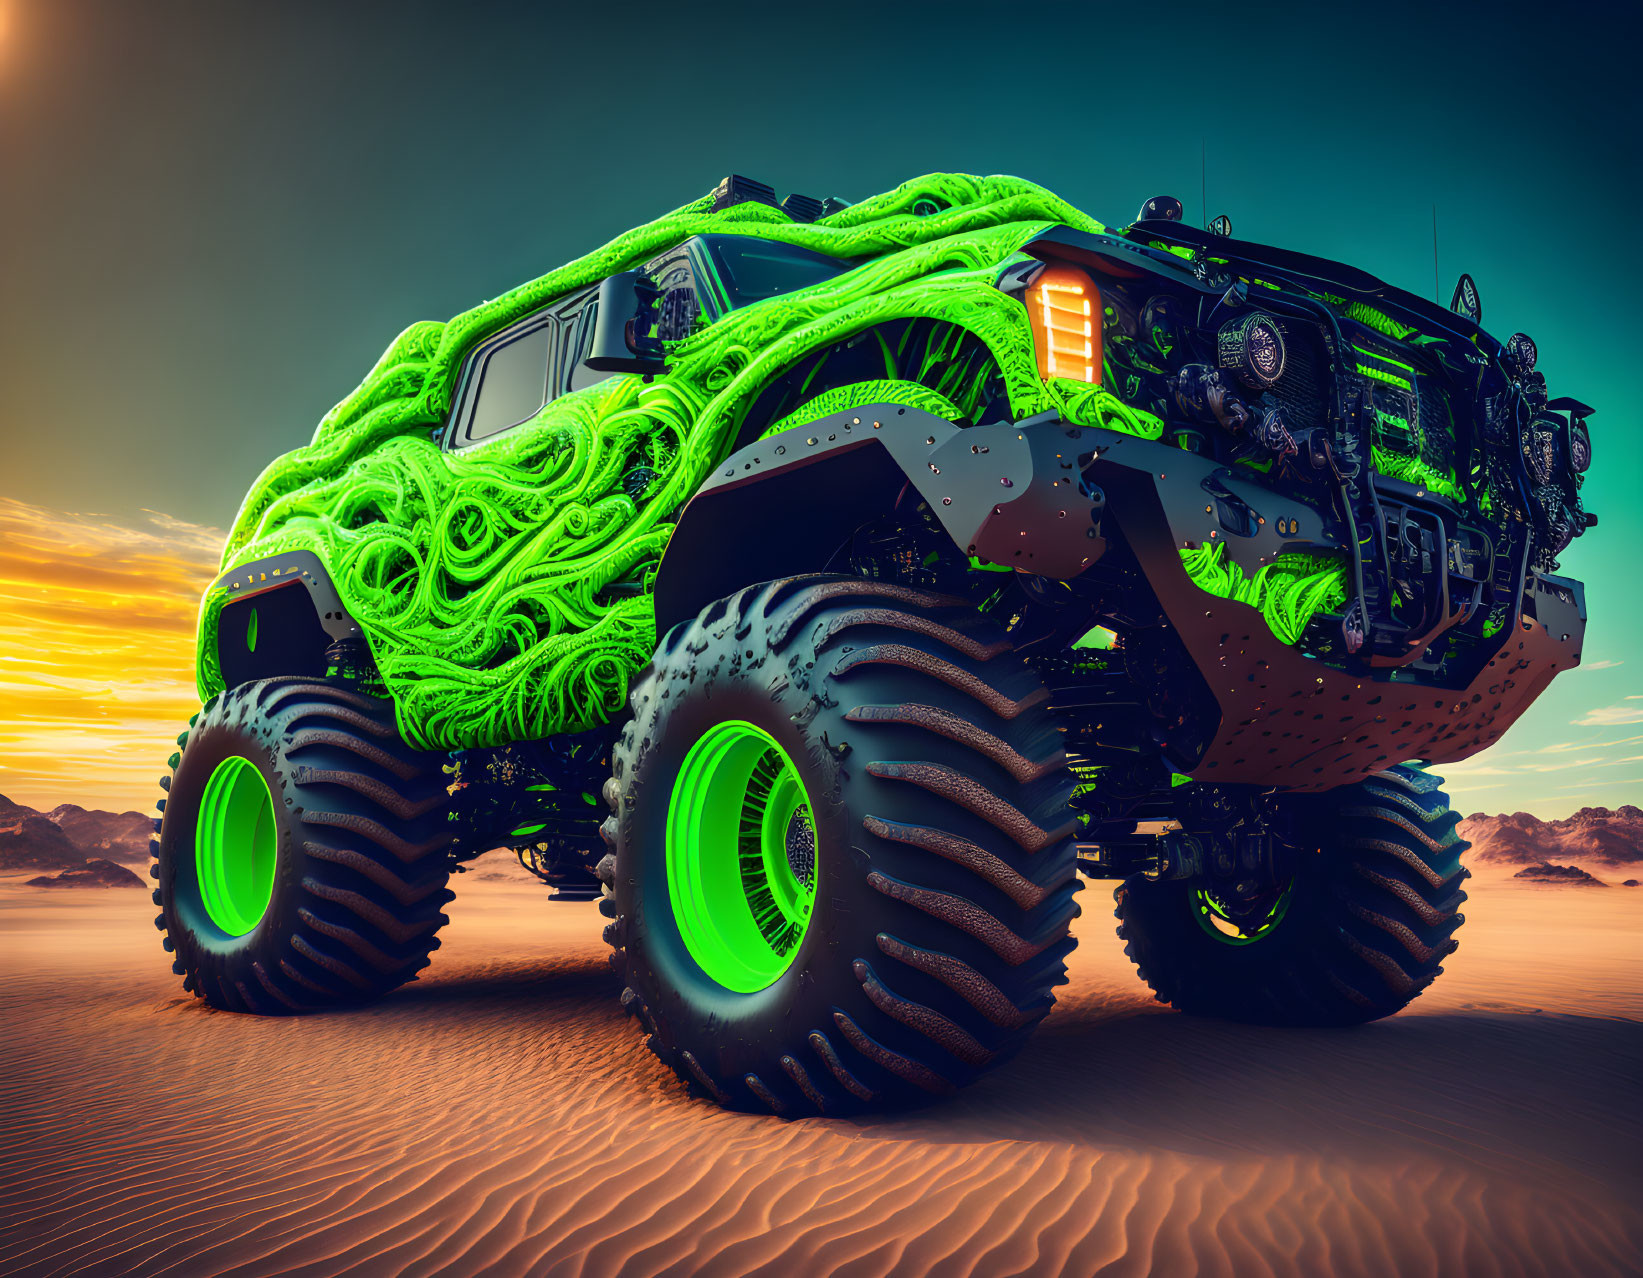 Futuristic vehicle with neon green ornate patterns on sandy terrain